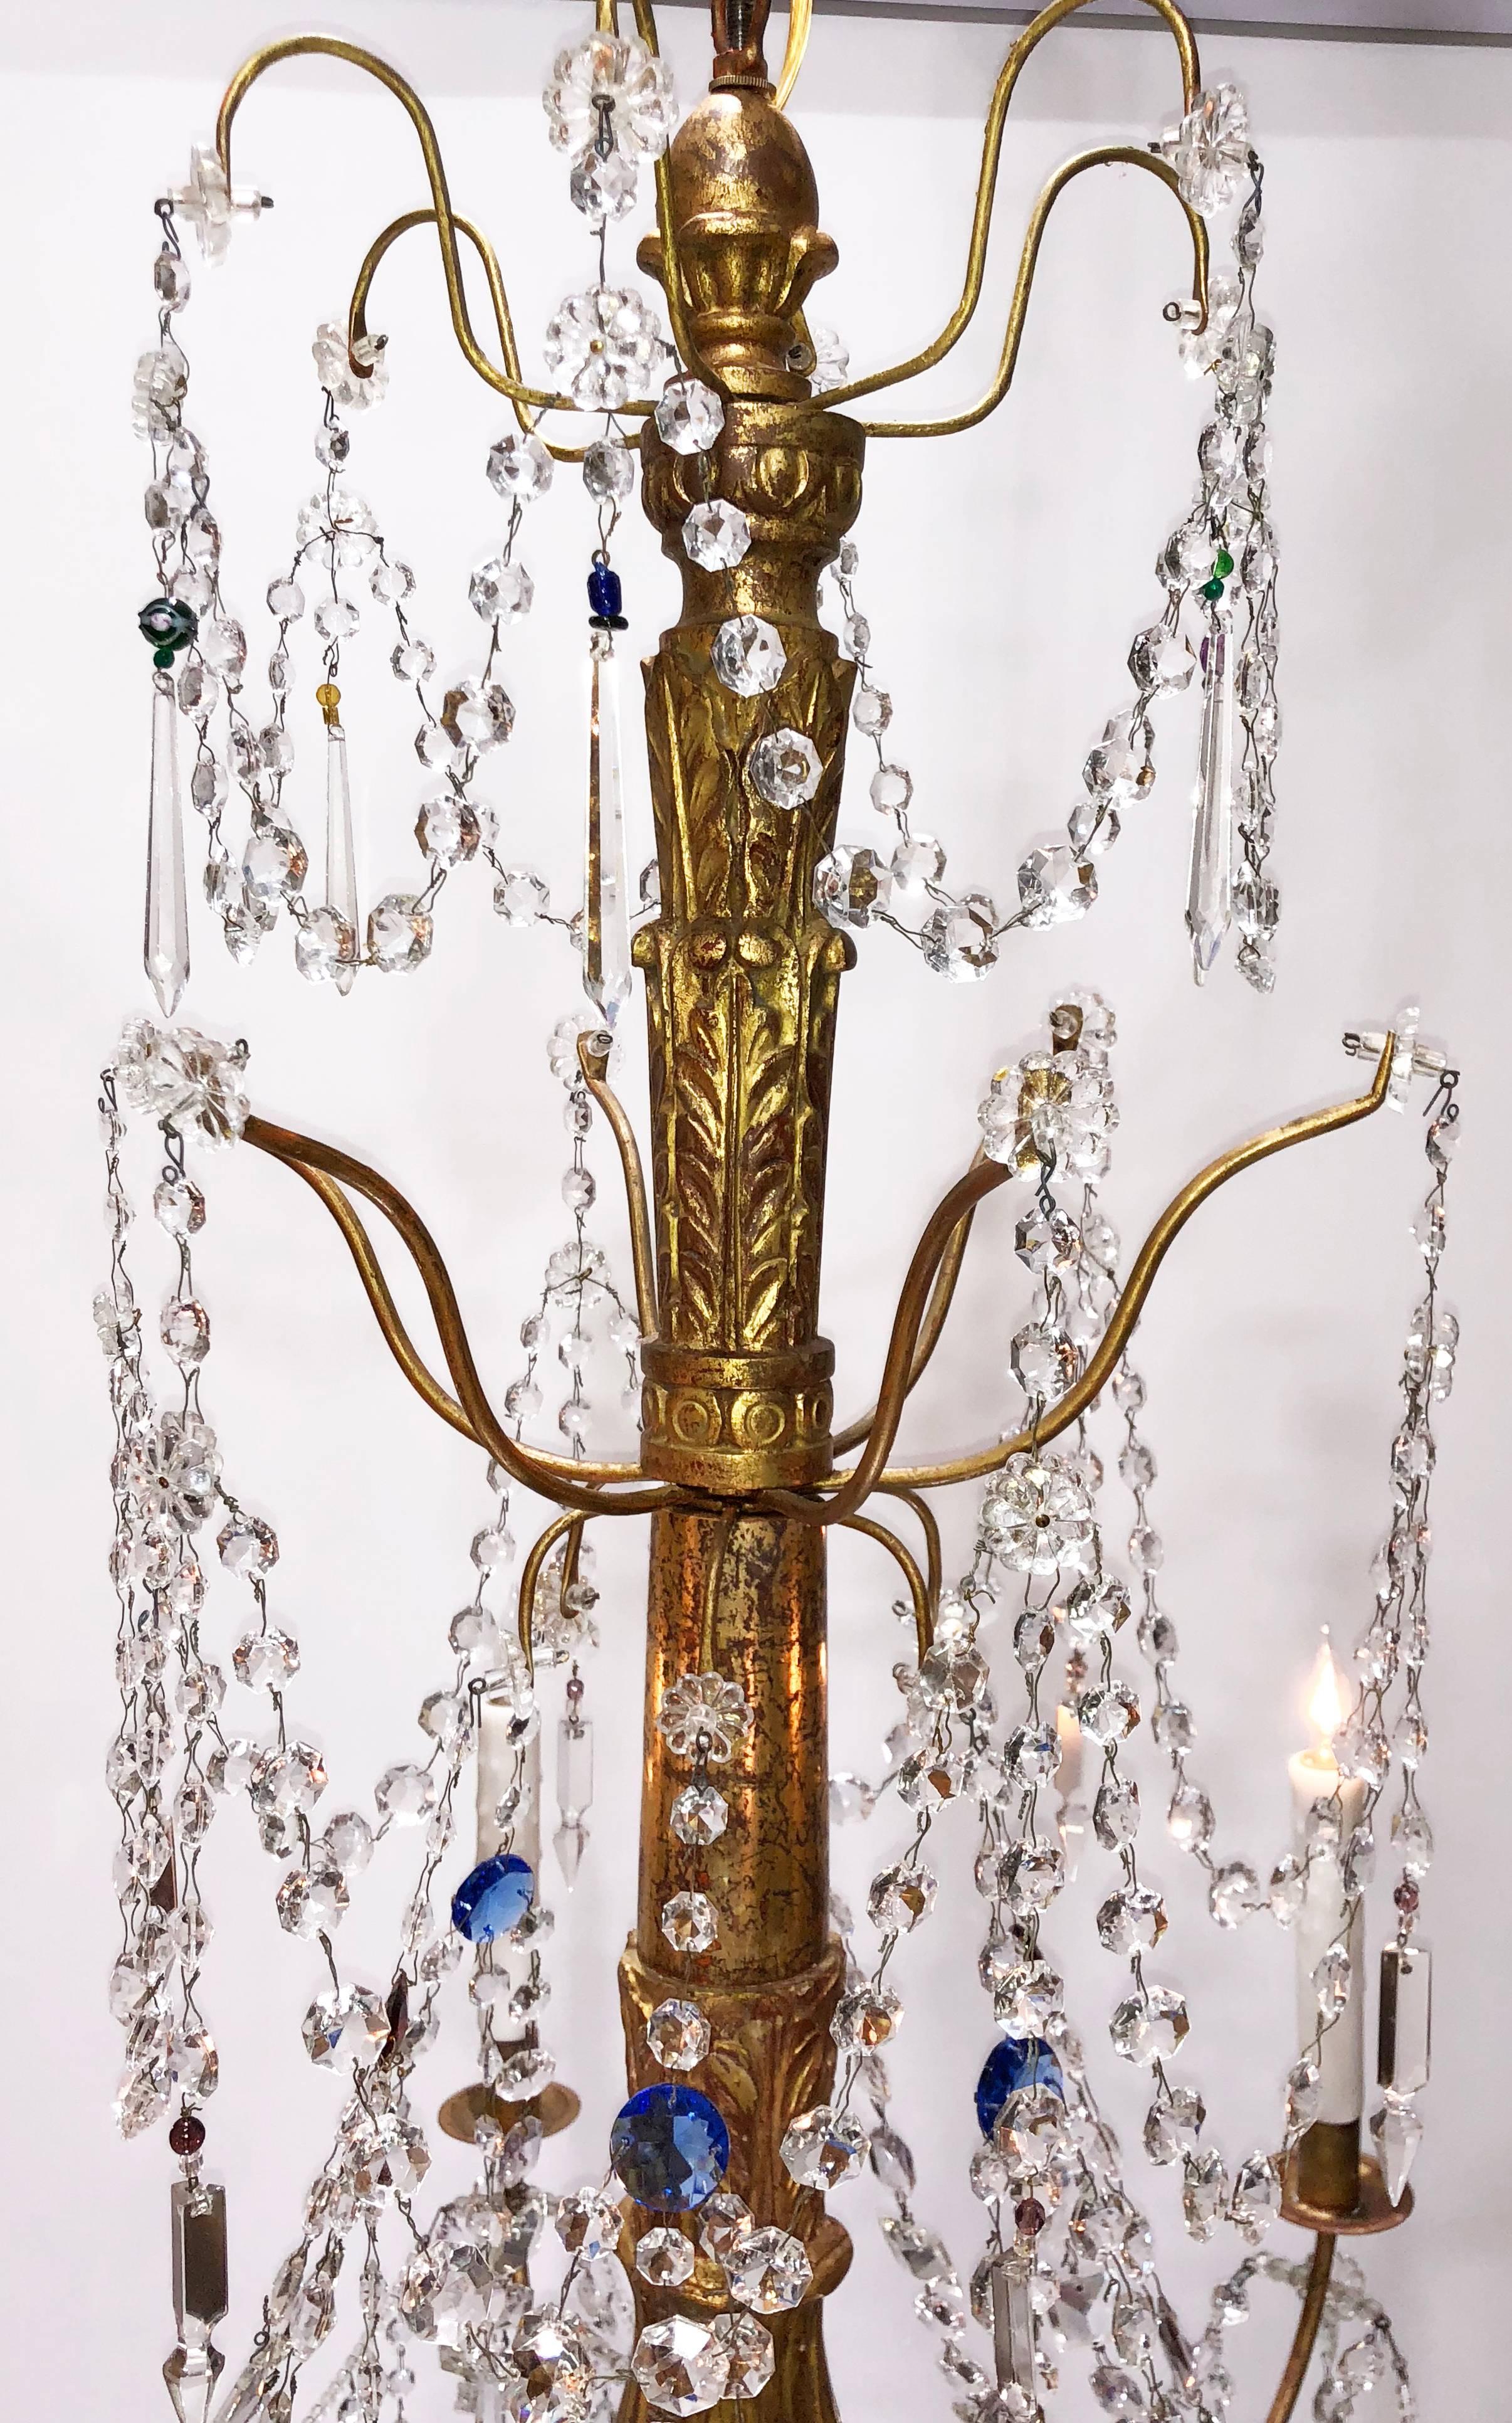 A grand scale Italian Genovese carved giltwood, crystal and tole chandelier, circa 1890, featuring colored crystals. Six-arm chandelier with crystal swag and beading. The chandelier has been recently rewired with new porcelain sockets.